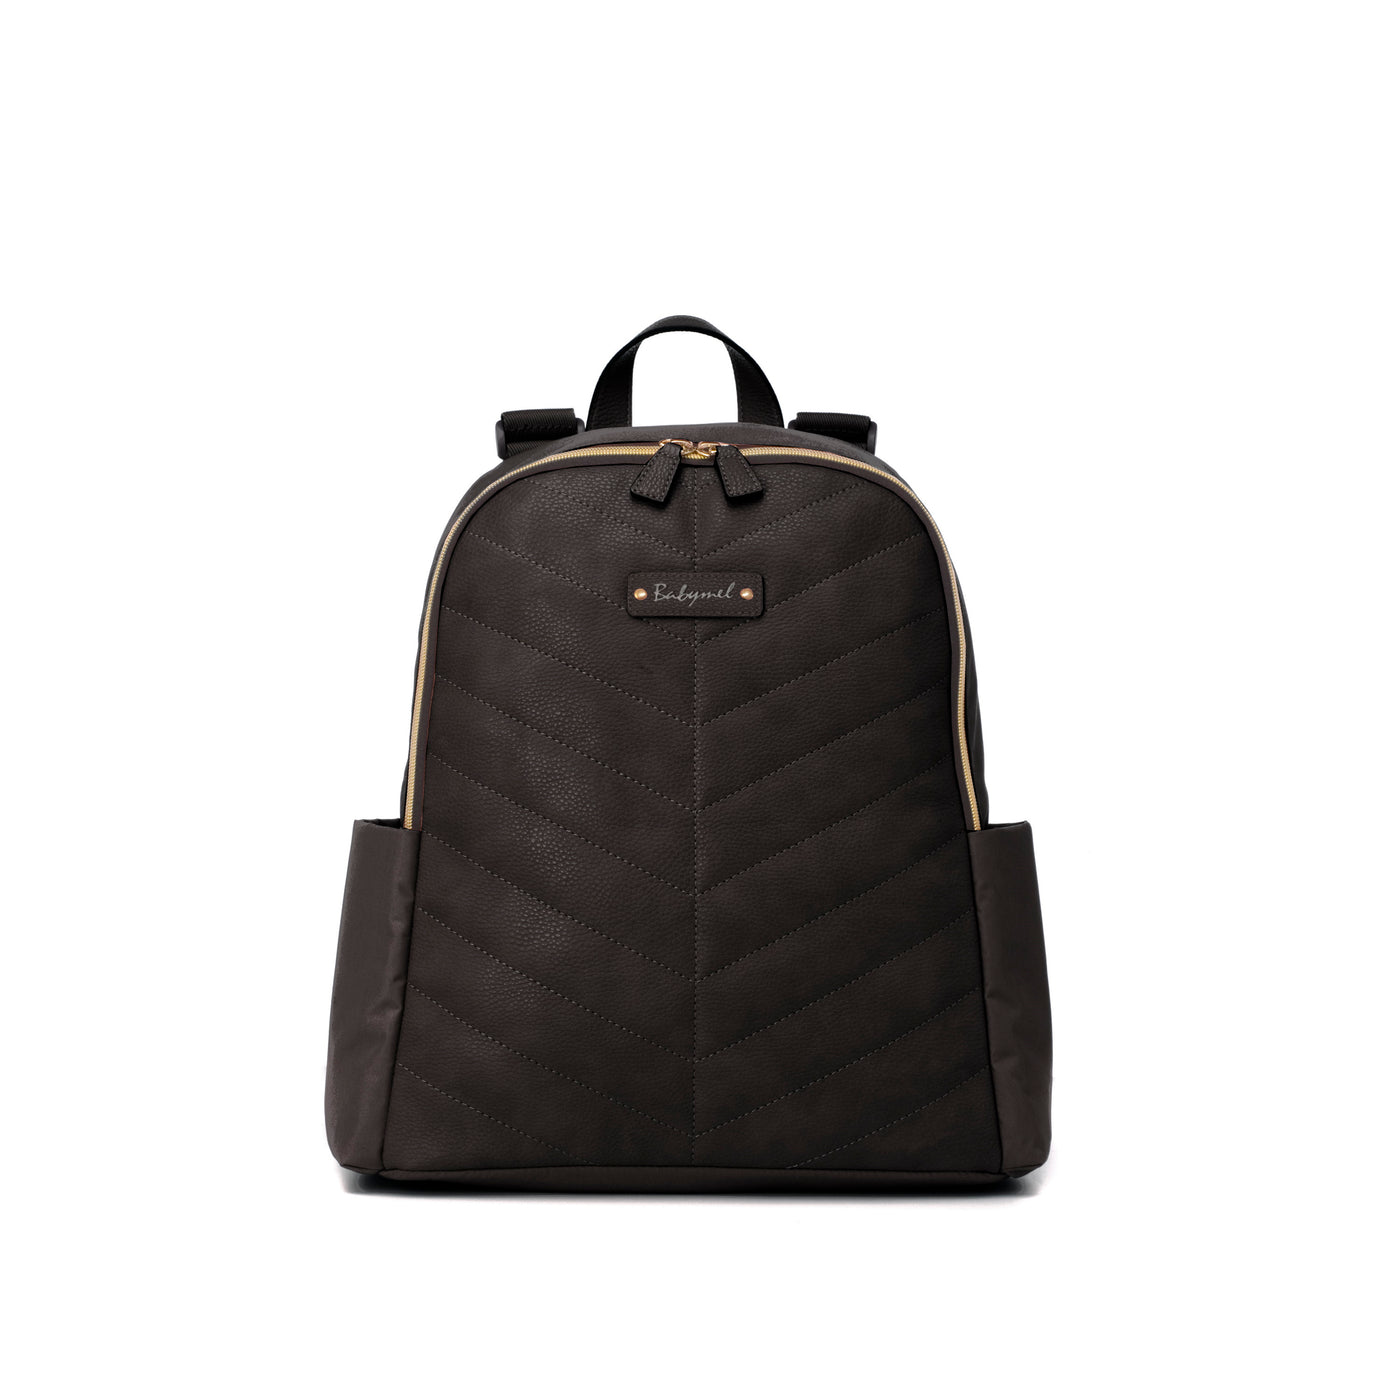 Gabby Backpack Nappy Bag with Vegan Faux Leather - Black